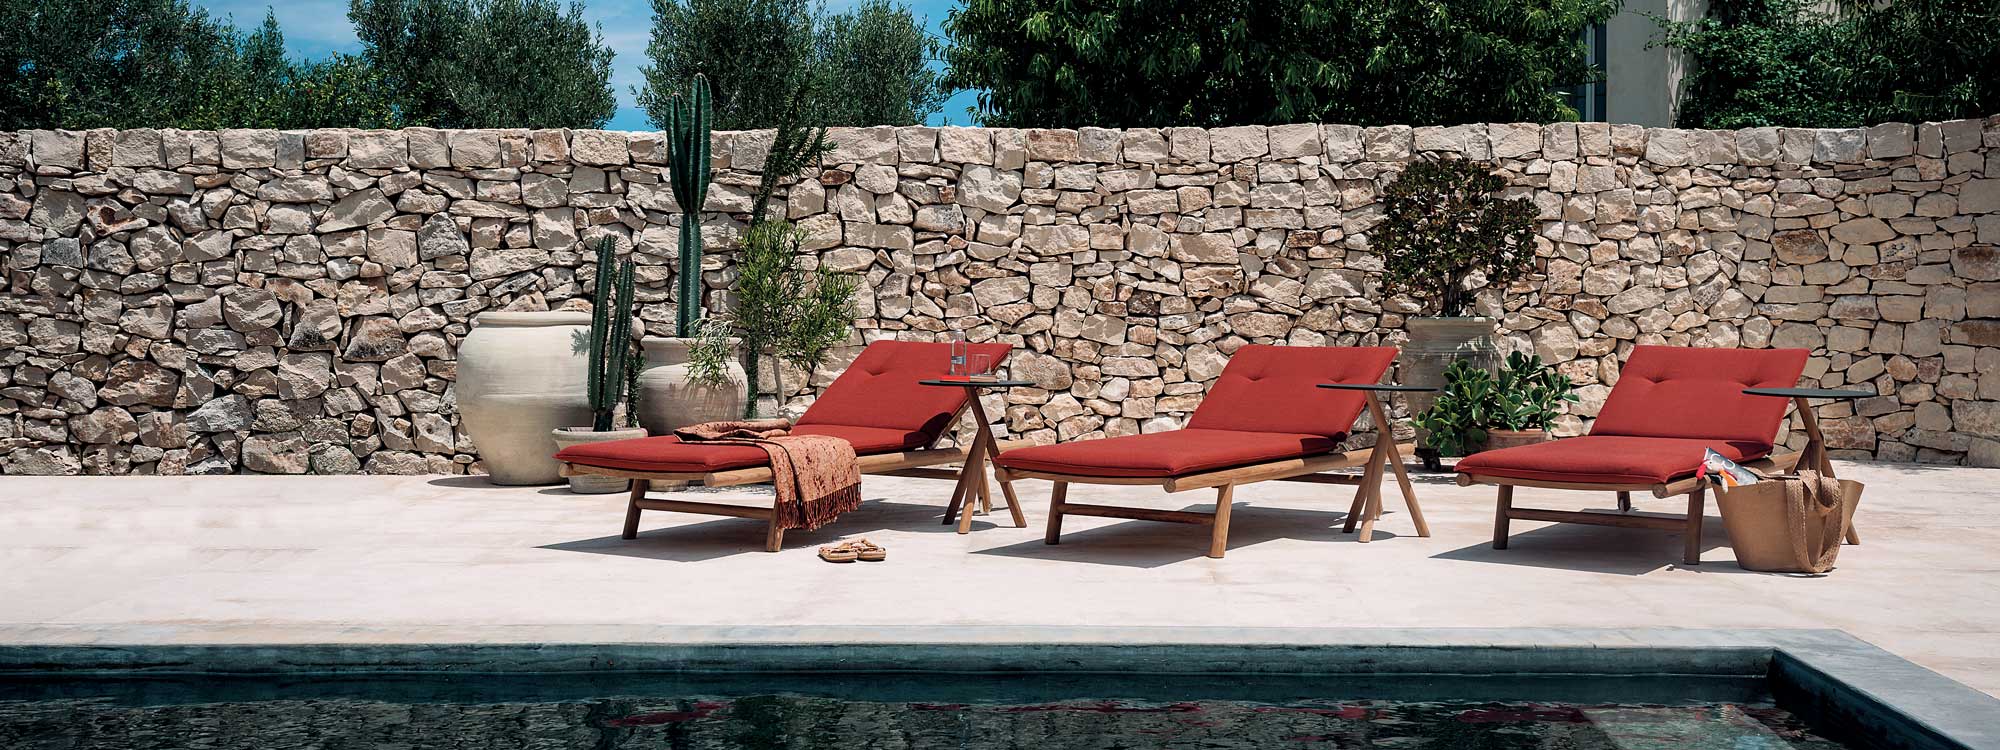 Row of Orson teak sun loungers with red cushions along poolside